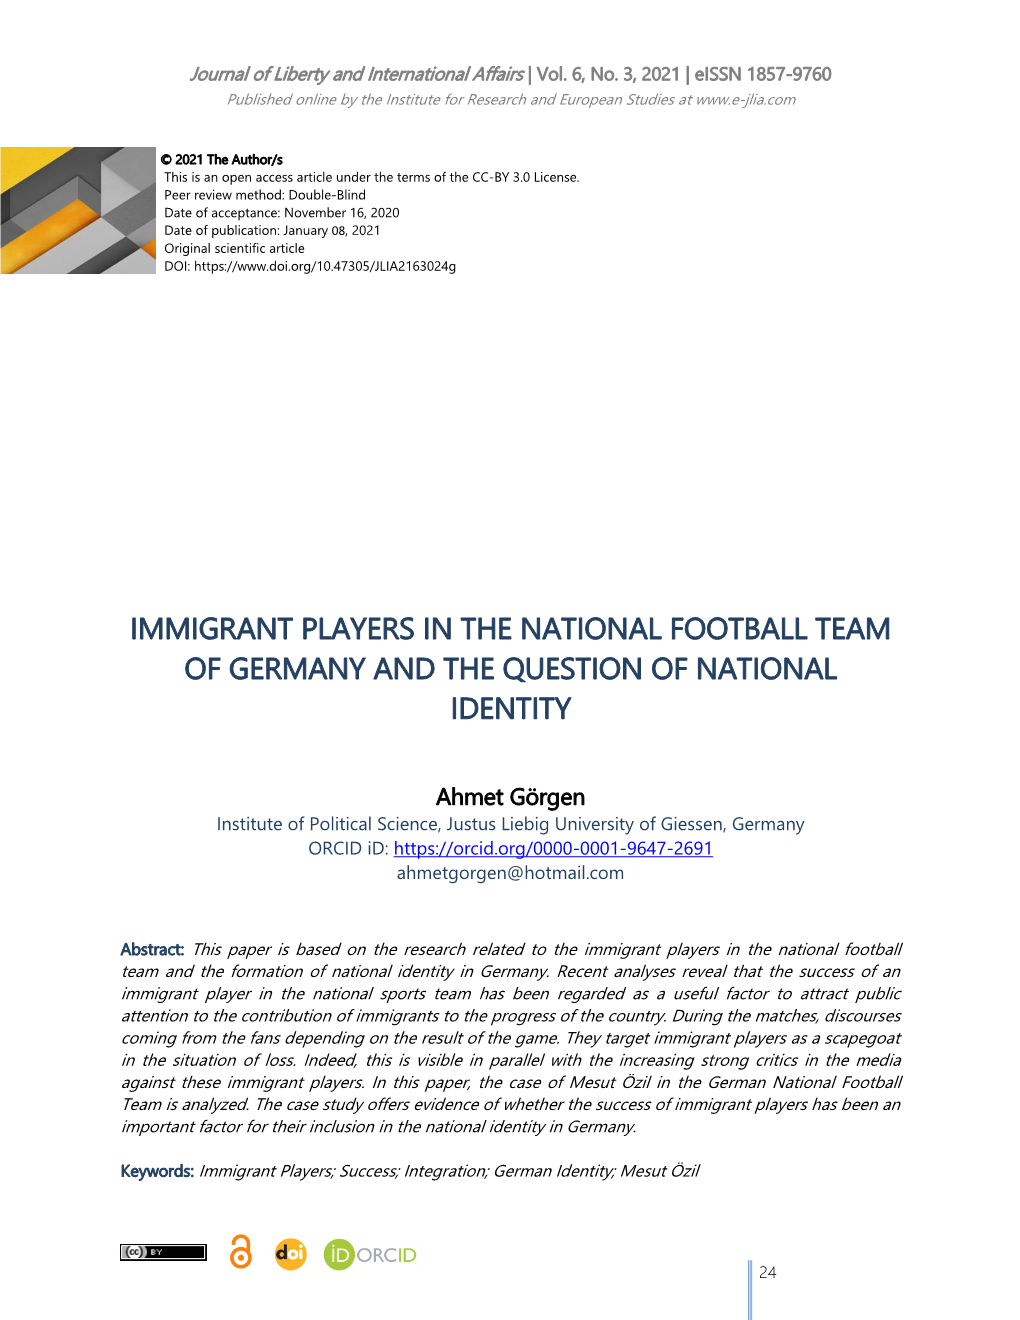 Immigrant Players in the National Football Team of Germany and the Question of National Identity